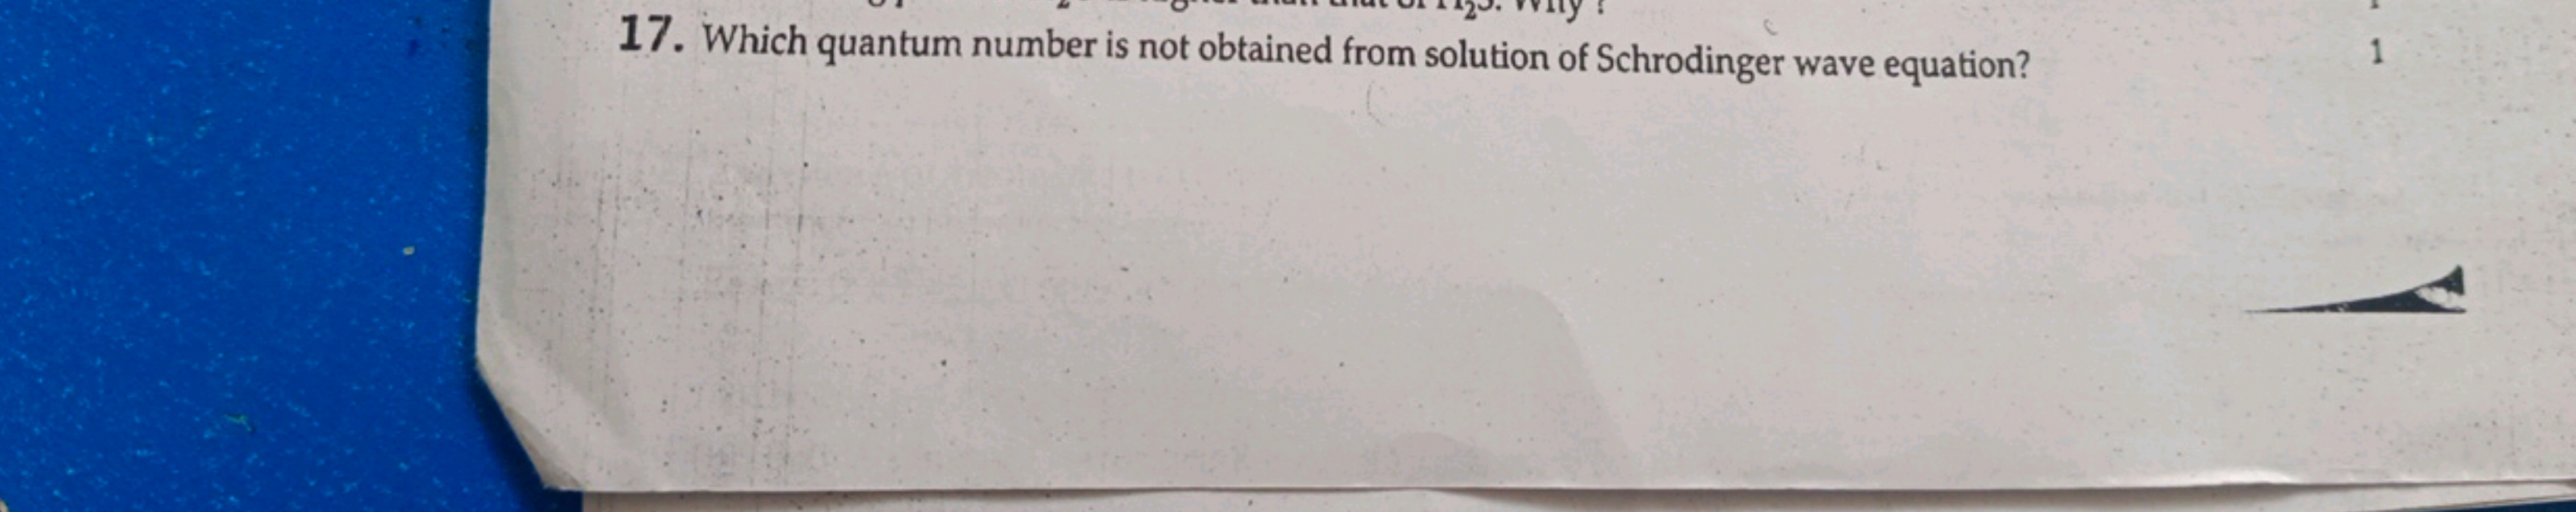 17. Which quantum number is not obtained from solution of Schrodinger 